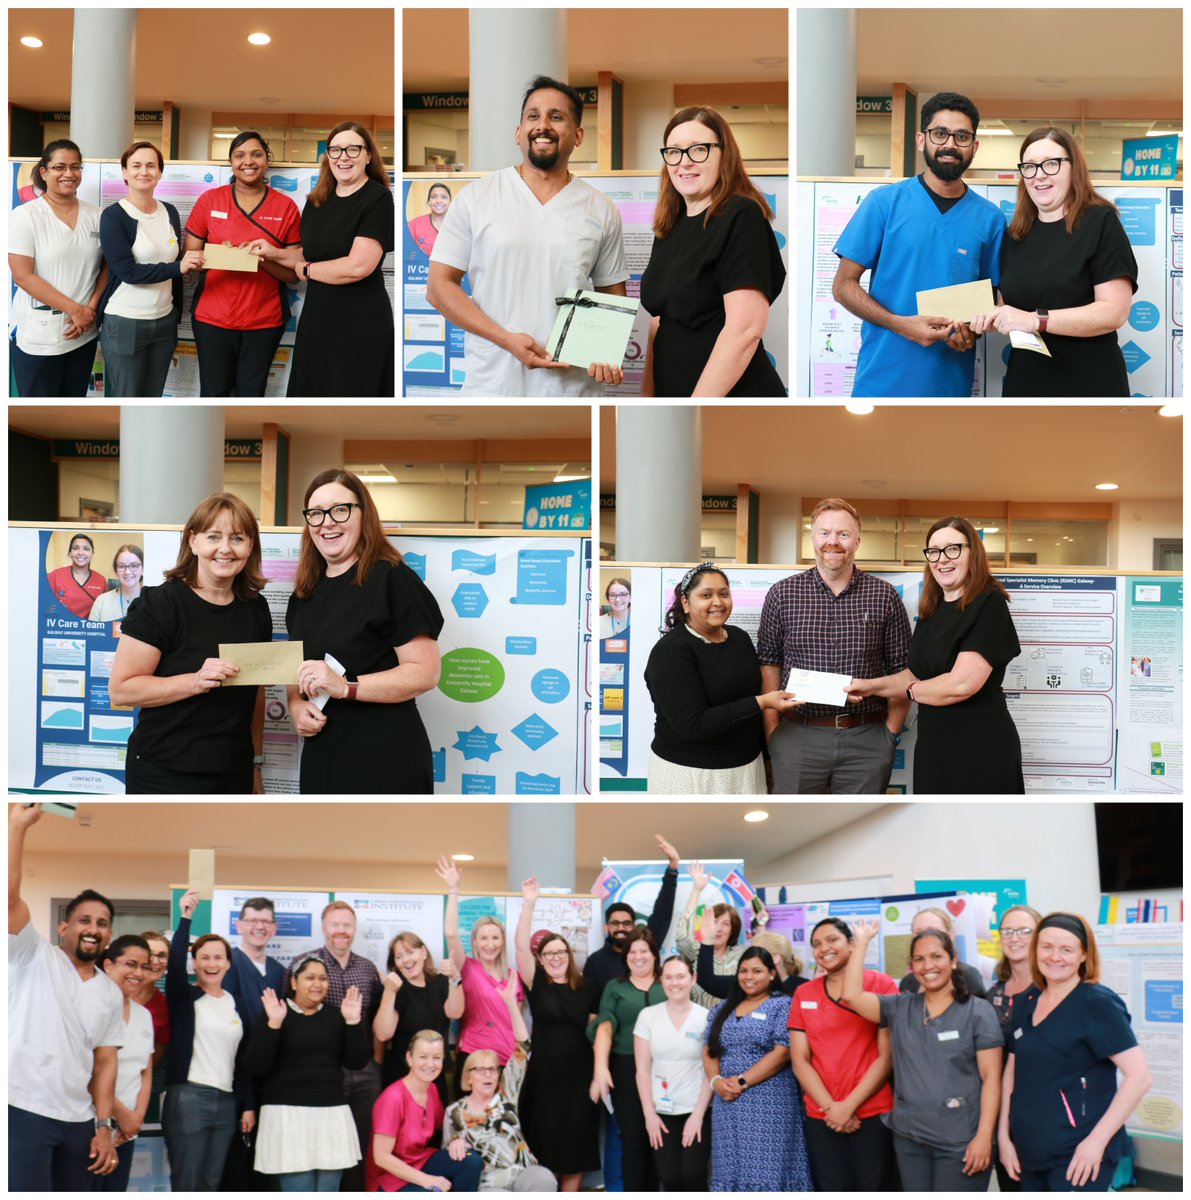 Thank you to all 42 poster submissions highlighting valuable nurse lead initiatives in #GUH. Congratulations to the five winners. Well done all!